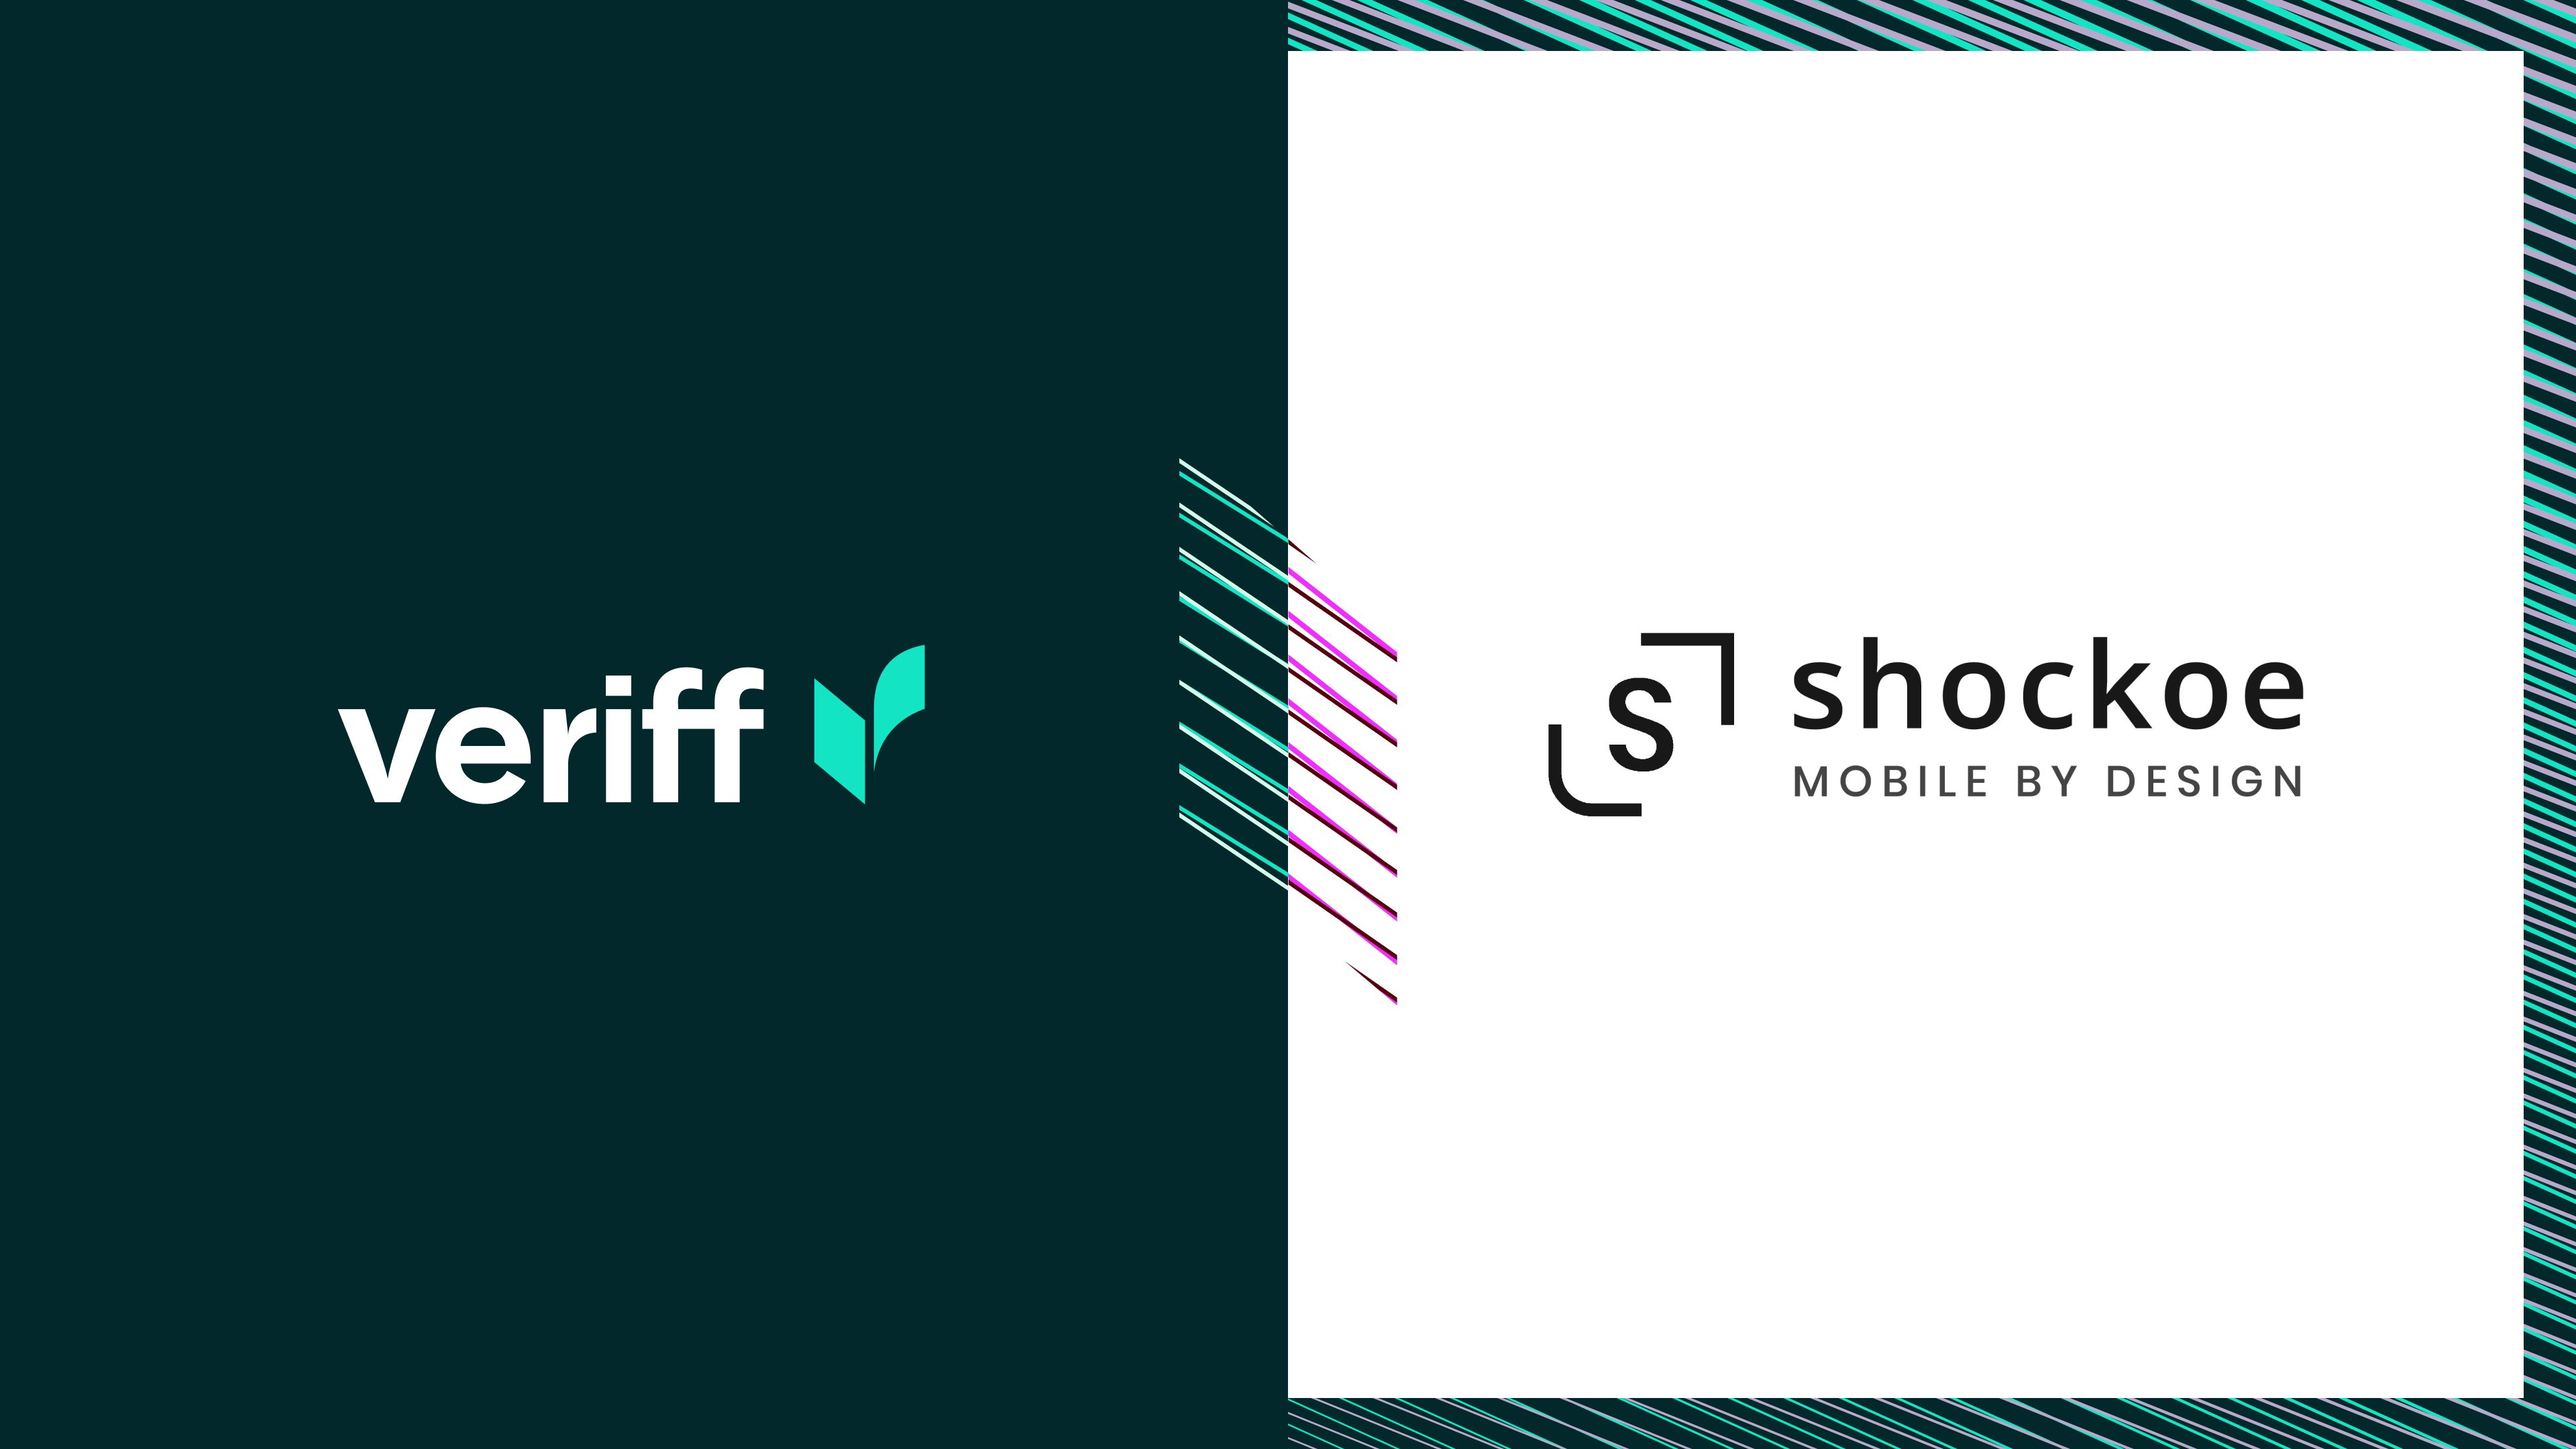 Veriff partners with Shockoe